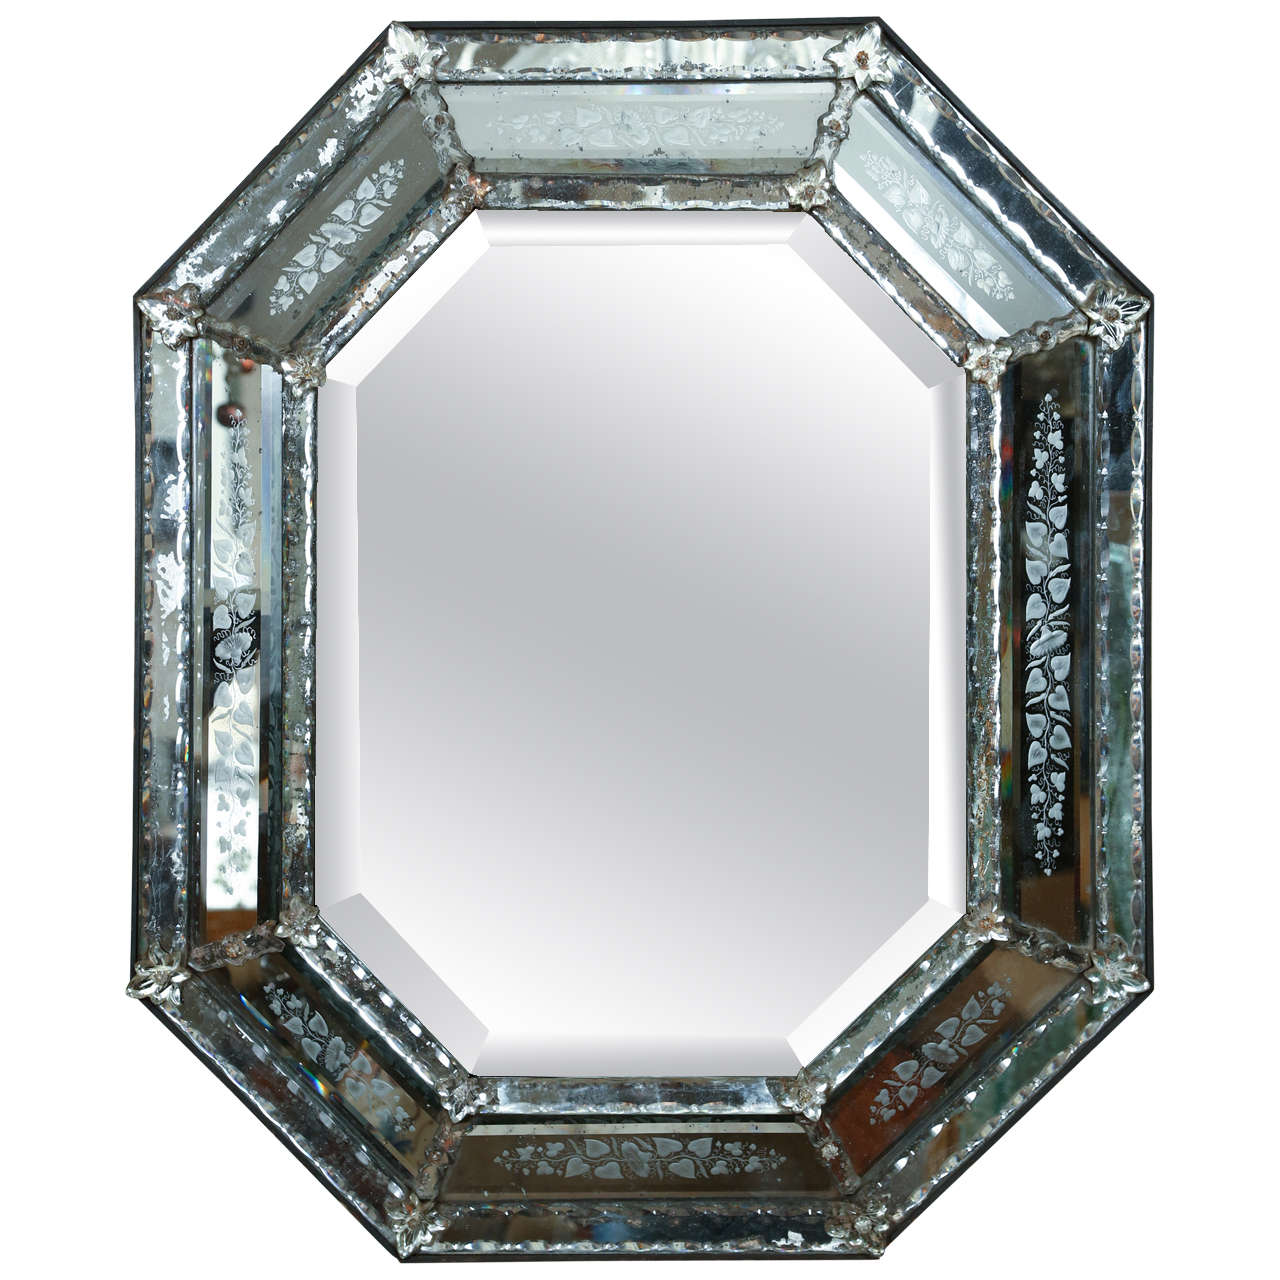 Venetian Mirror with Mercury Glass Etched Frame, circa 1840 